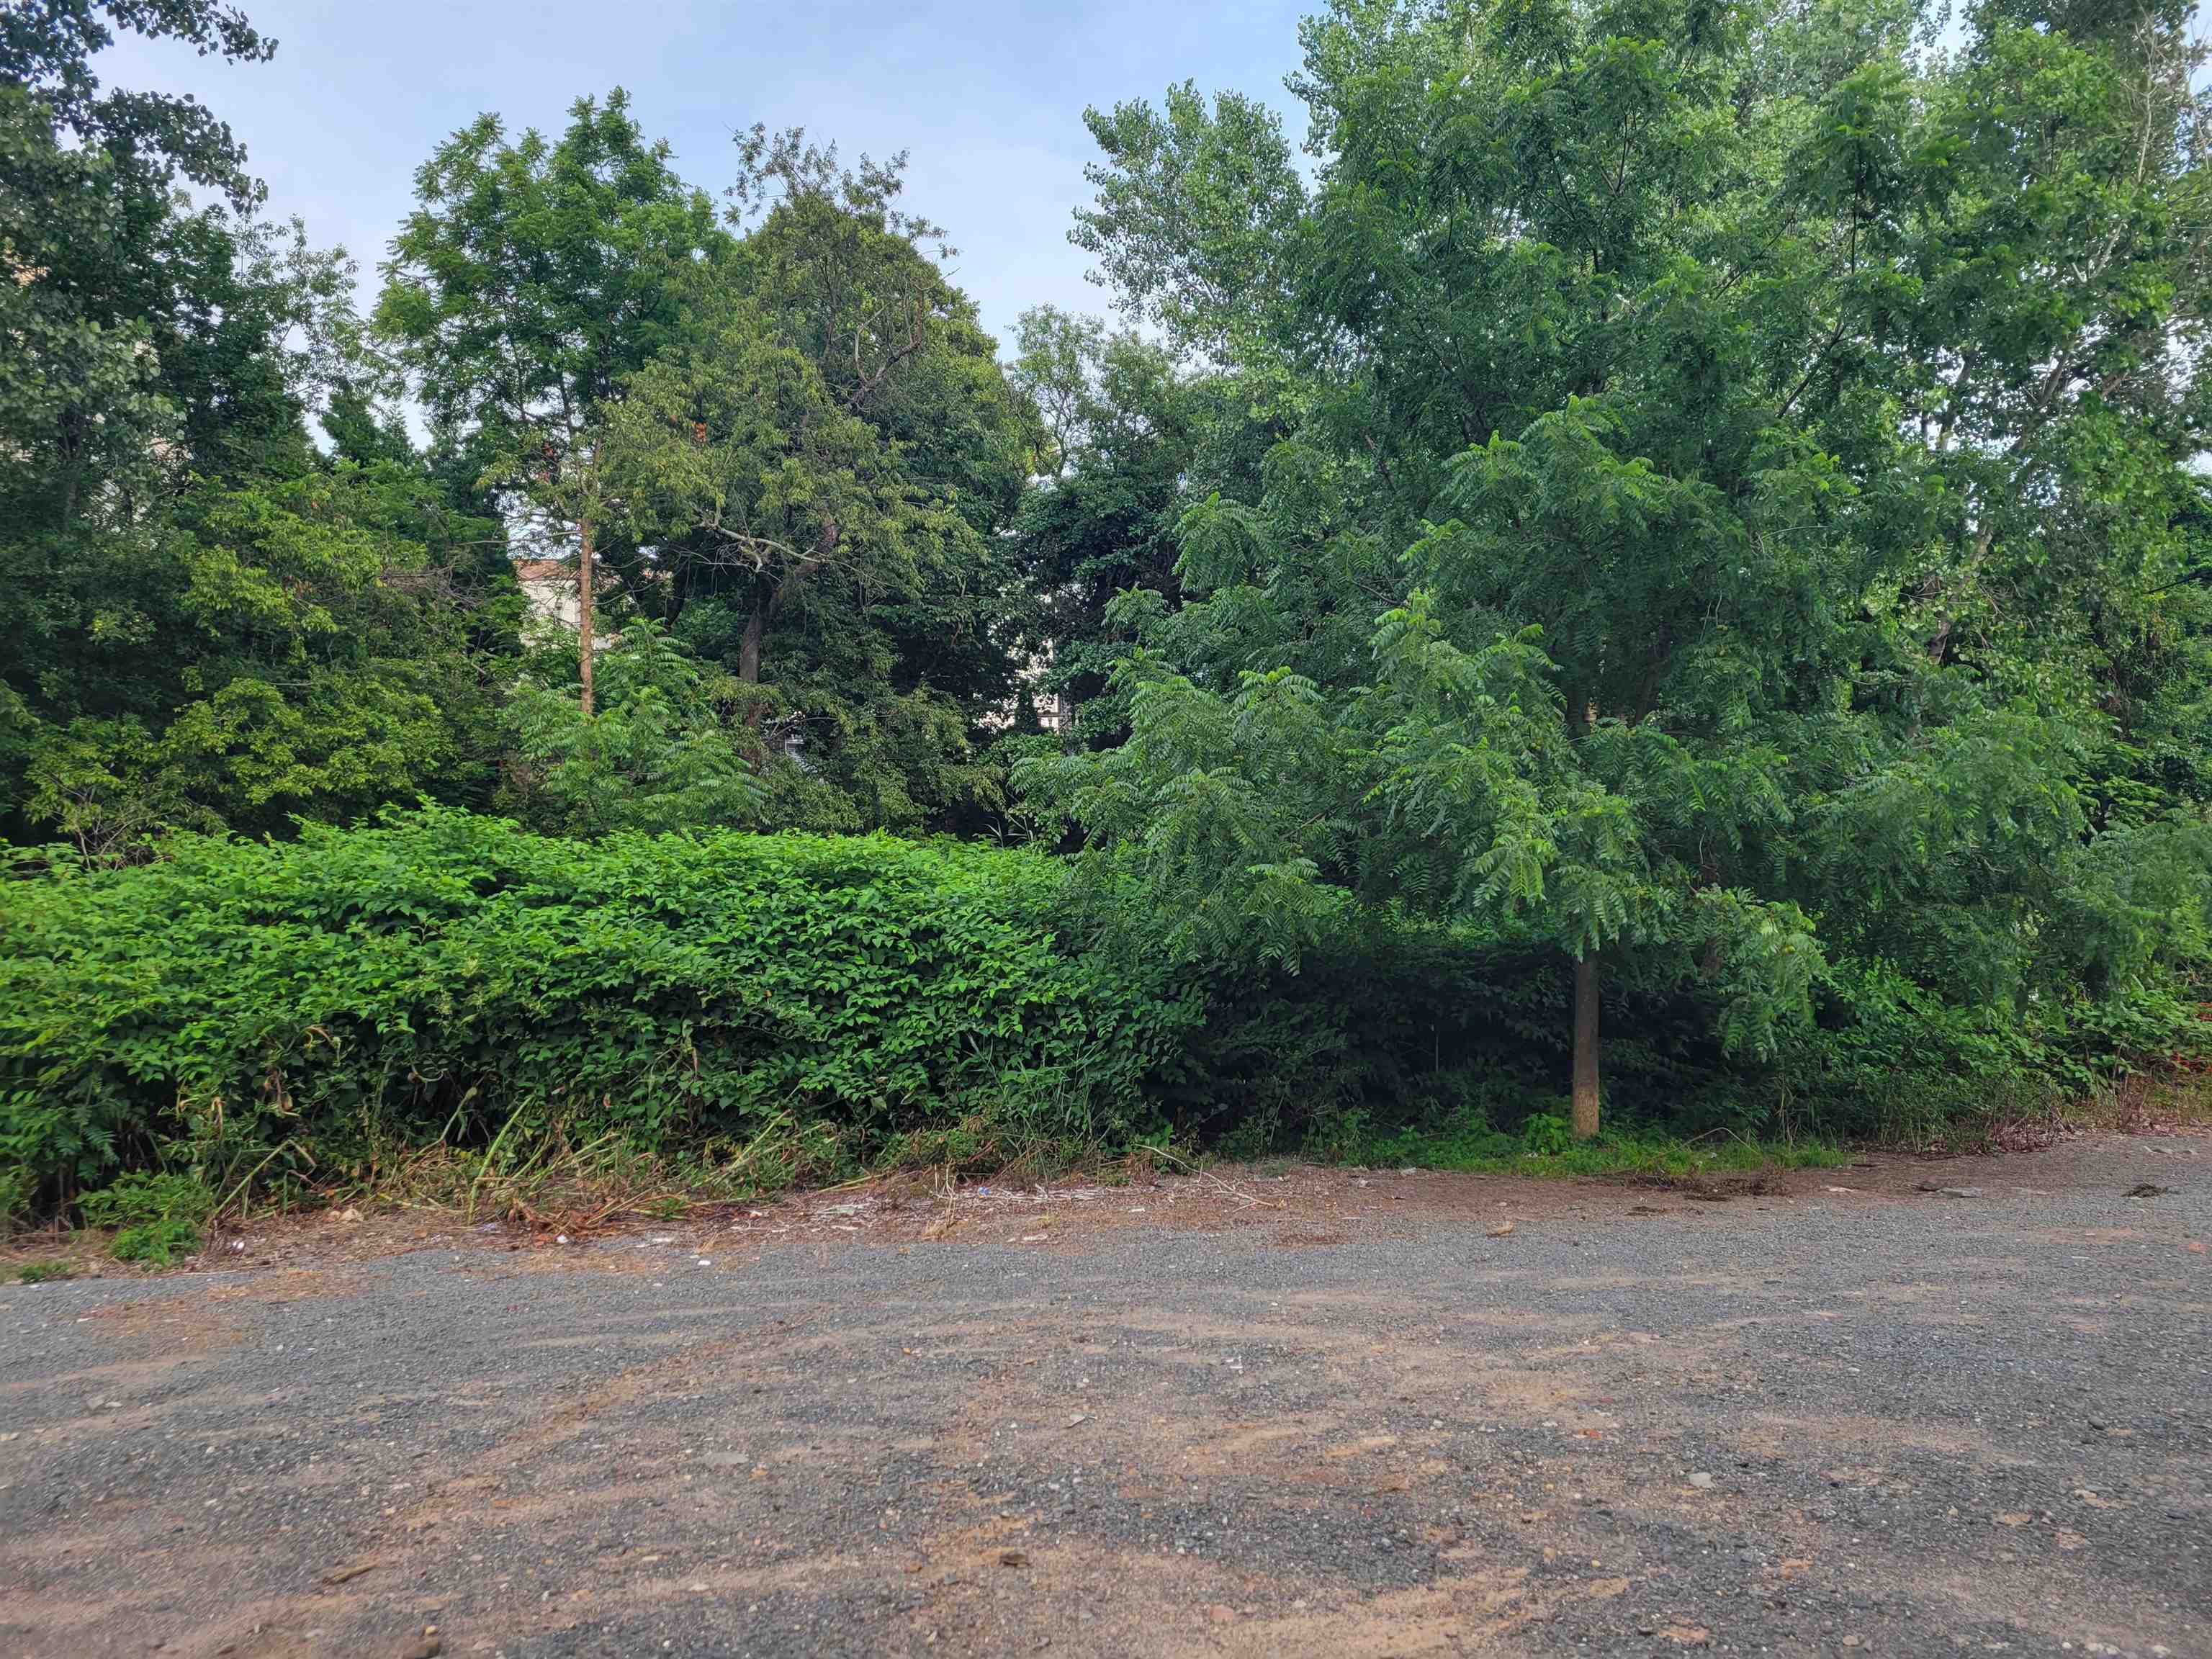 *Following lots in Block5403 must be sold together re: on Elm & Floyd Streets; Lots 1, 2, 3, 4, 5. and Lots 24, 25, 26 and 27. Floyd and Elm Street Lots are contiguous. Developers/Investors! Rare opportunity=9 vacant  lots in The Heights section appr.1 mile to Journal Square Path. Must be sold together.  Currently zoned in 1-2 residential. Sewer utilities located in both Floyd & Elm Streets. JCMUA water and sewer line maps attached to the mls.  (Topographical Survey uploaded to mls) Total lot size is approximately 26,364 sq.ft. or .605 acre. Completed 963page Environmental Study/Phase 1 (avail upon request) While an excerpt of Phase 1 is uploaded to mls. Bd. of Adj. application anticipated for variance to allow multi-unit building.  Final variance approval is the responsibility of the Buyer. Additional to current description of land.....PRICE REDUCTION is based on drawings that provide proposal for 79 units requiring 1 height variance for 9 lots. Possible for more units but requires more variances and construction costs.  In addition, lot 15 may be purchased but at an additional cost per negotiations. Drawings for 79 units are attached.  Absolutely, No access to vacant lots permitted from either Liberty or Floyd Avenues. Absolutely no showings/access to vacant lots from Elm Street without confirmed appointment.  Perspective buyers may NOT view vacant lots without written permission and may not enter owners property without an appointment confirmed in writing. Trespassers will be prosecuted.